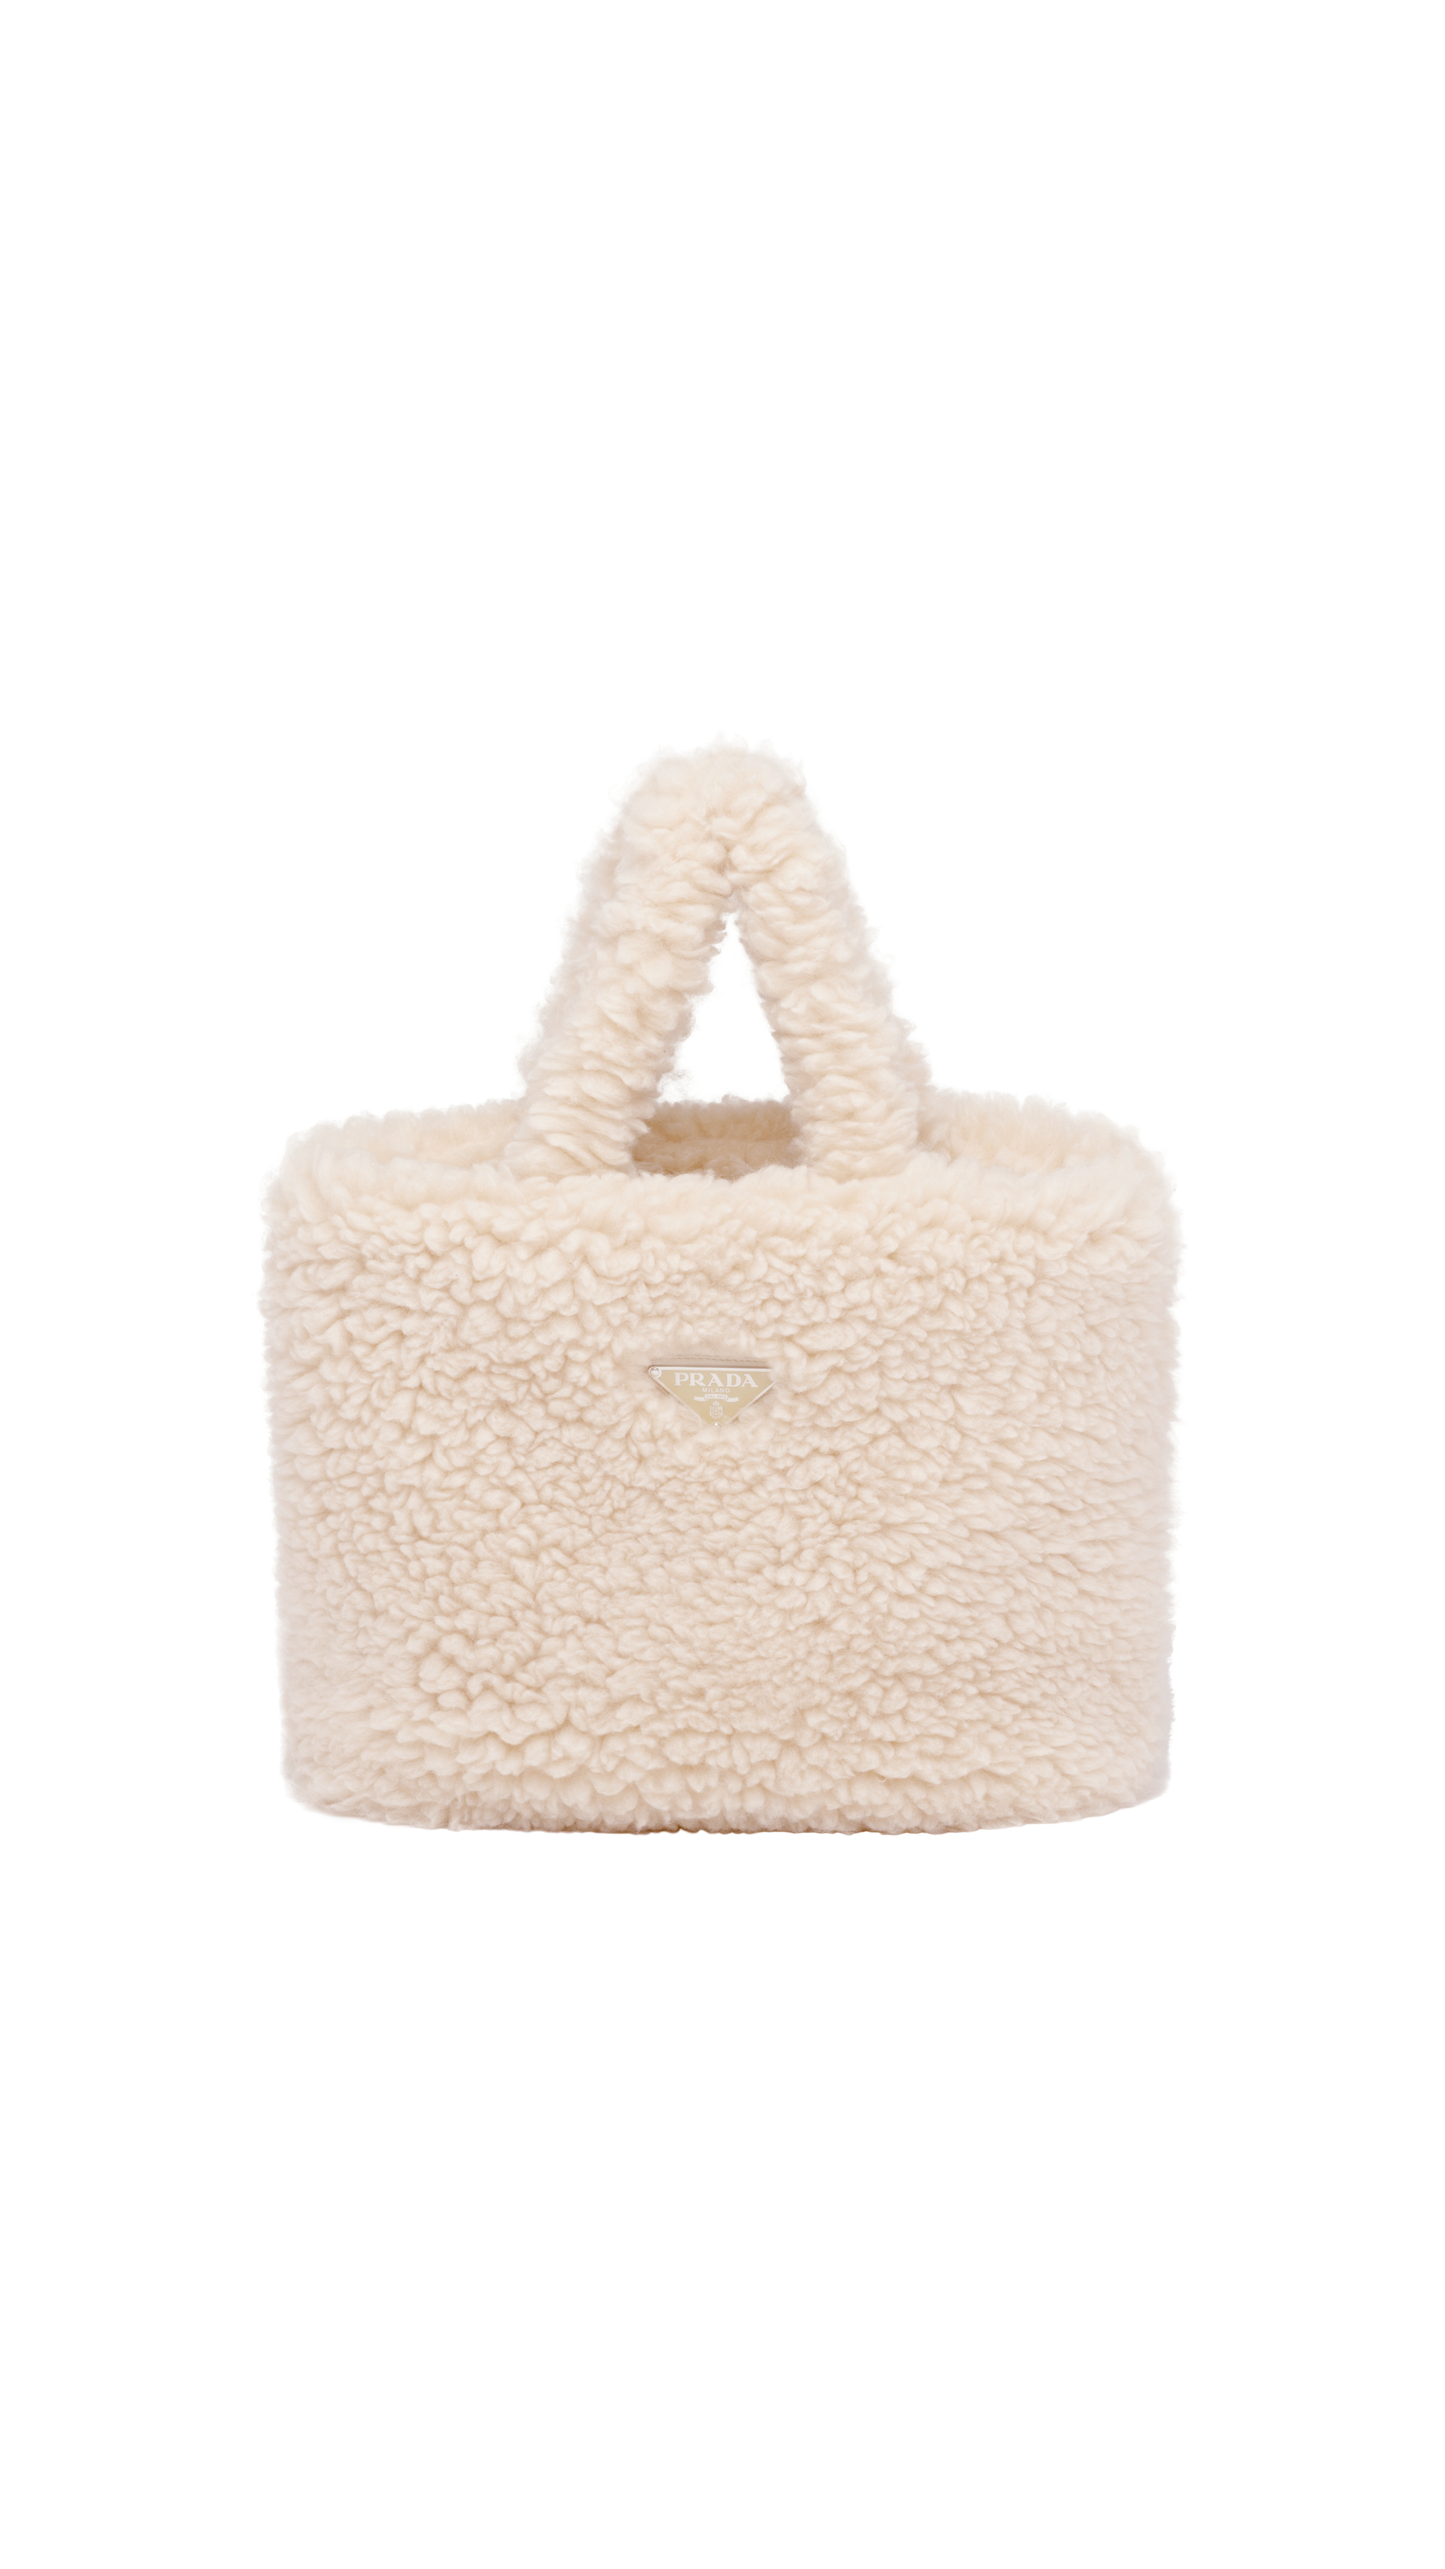 Wool and Cashmere Tote Bag - White